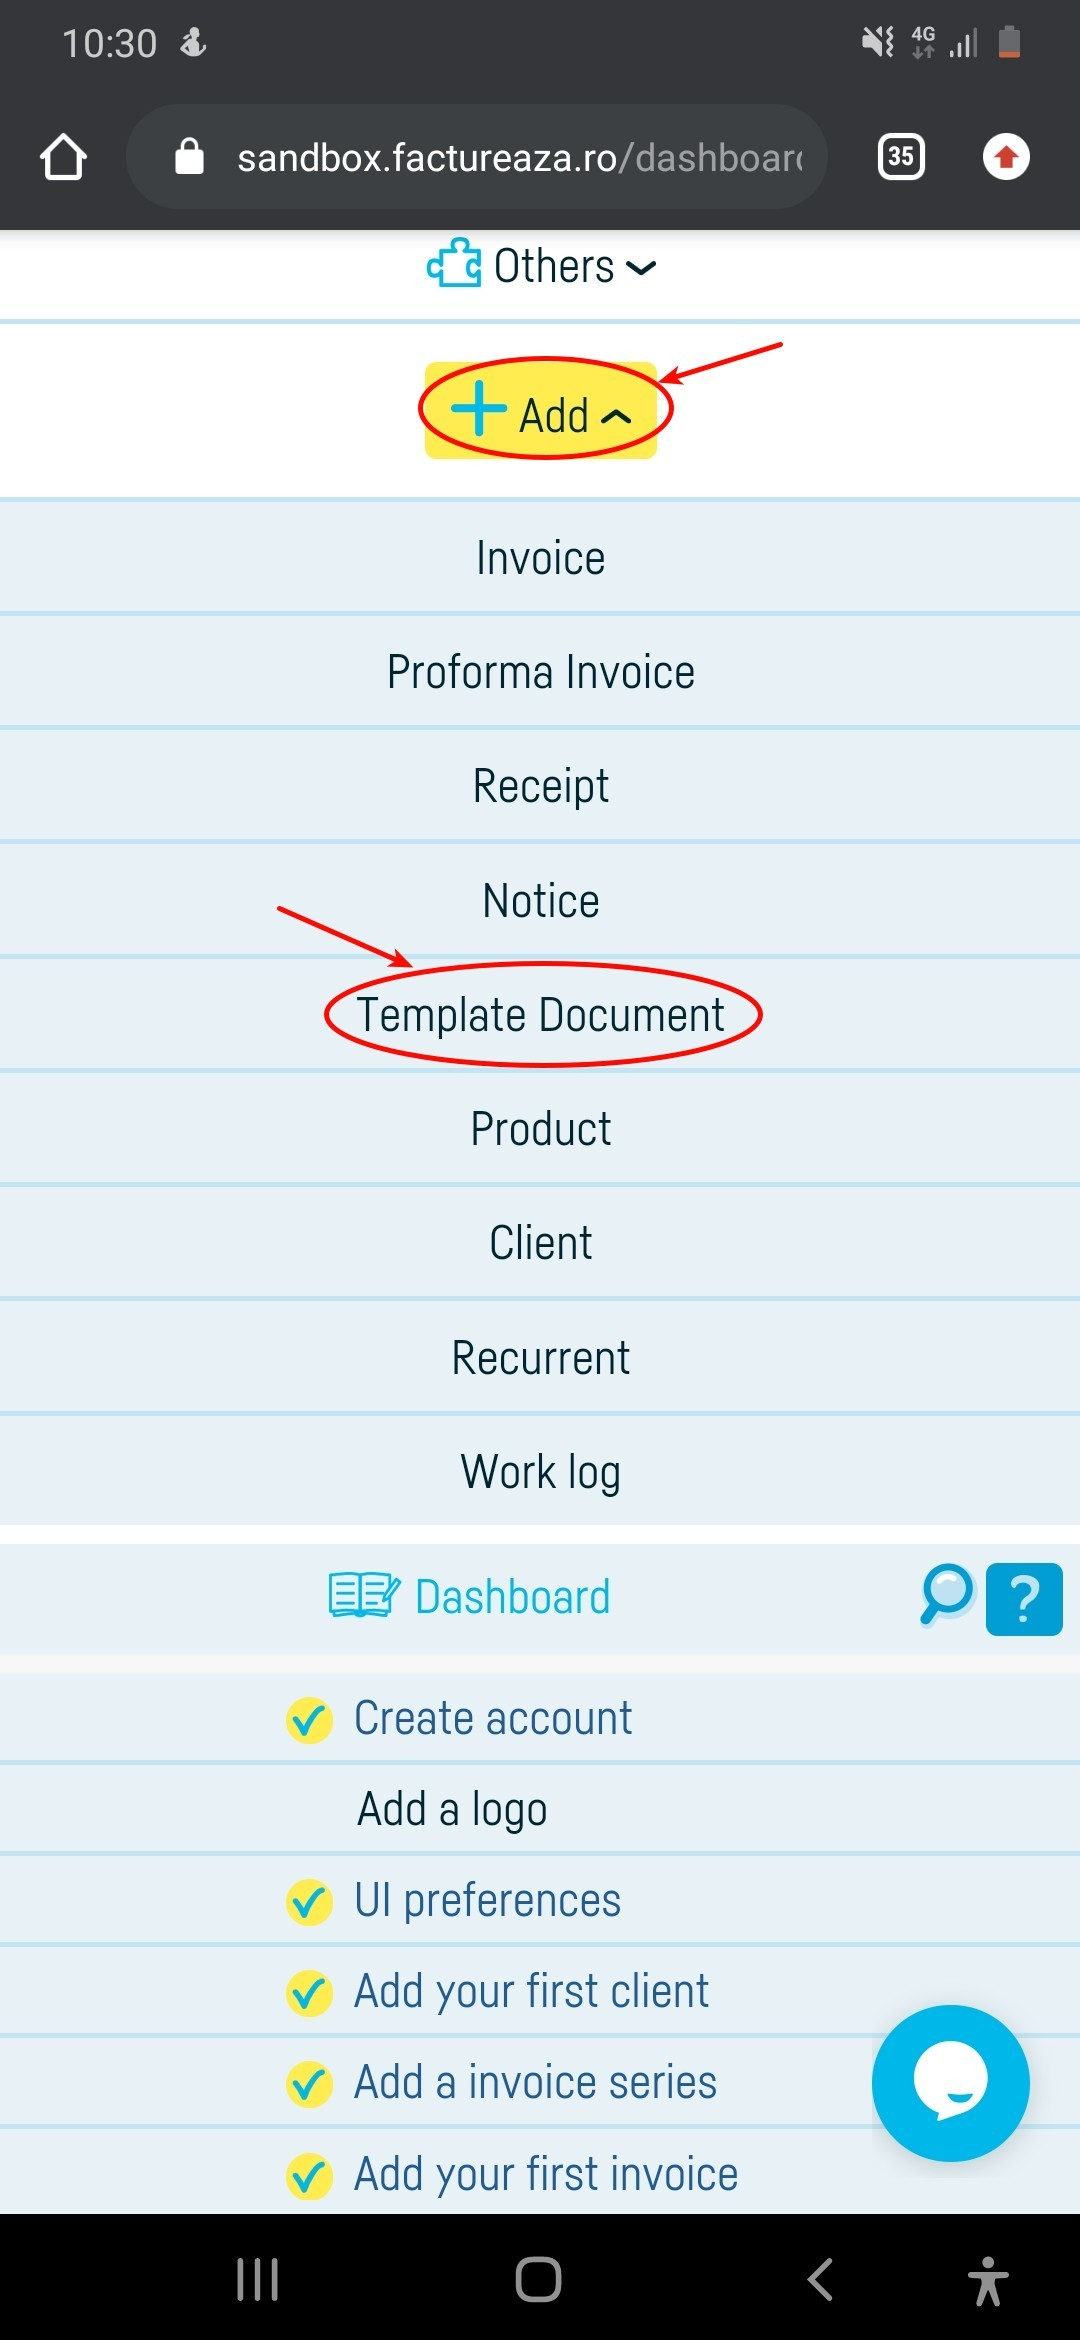 Generate a document from a standard document template - pasul 2